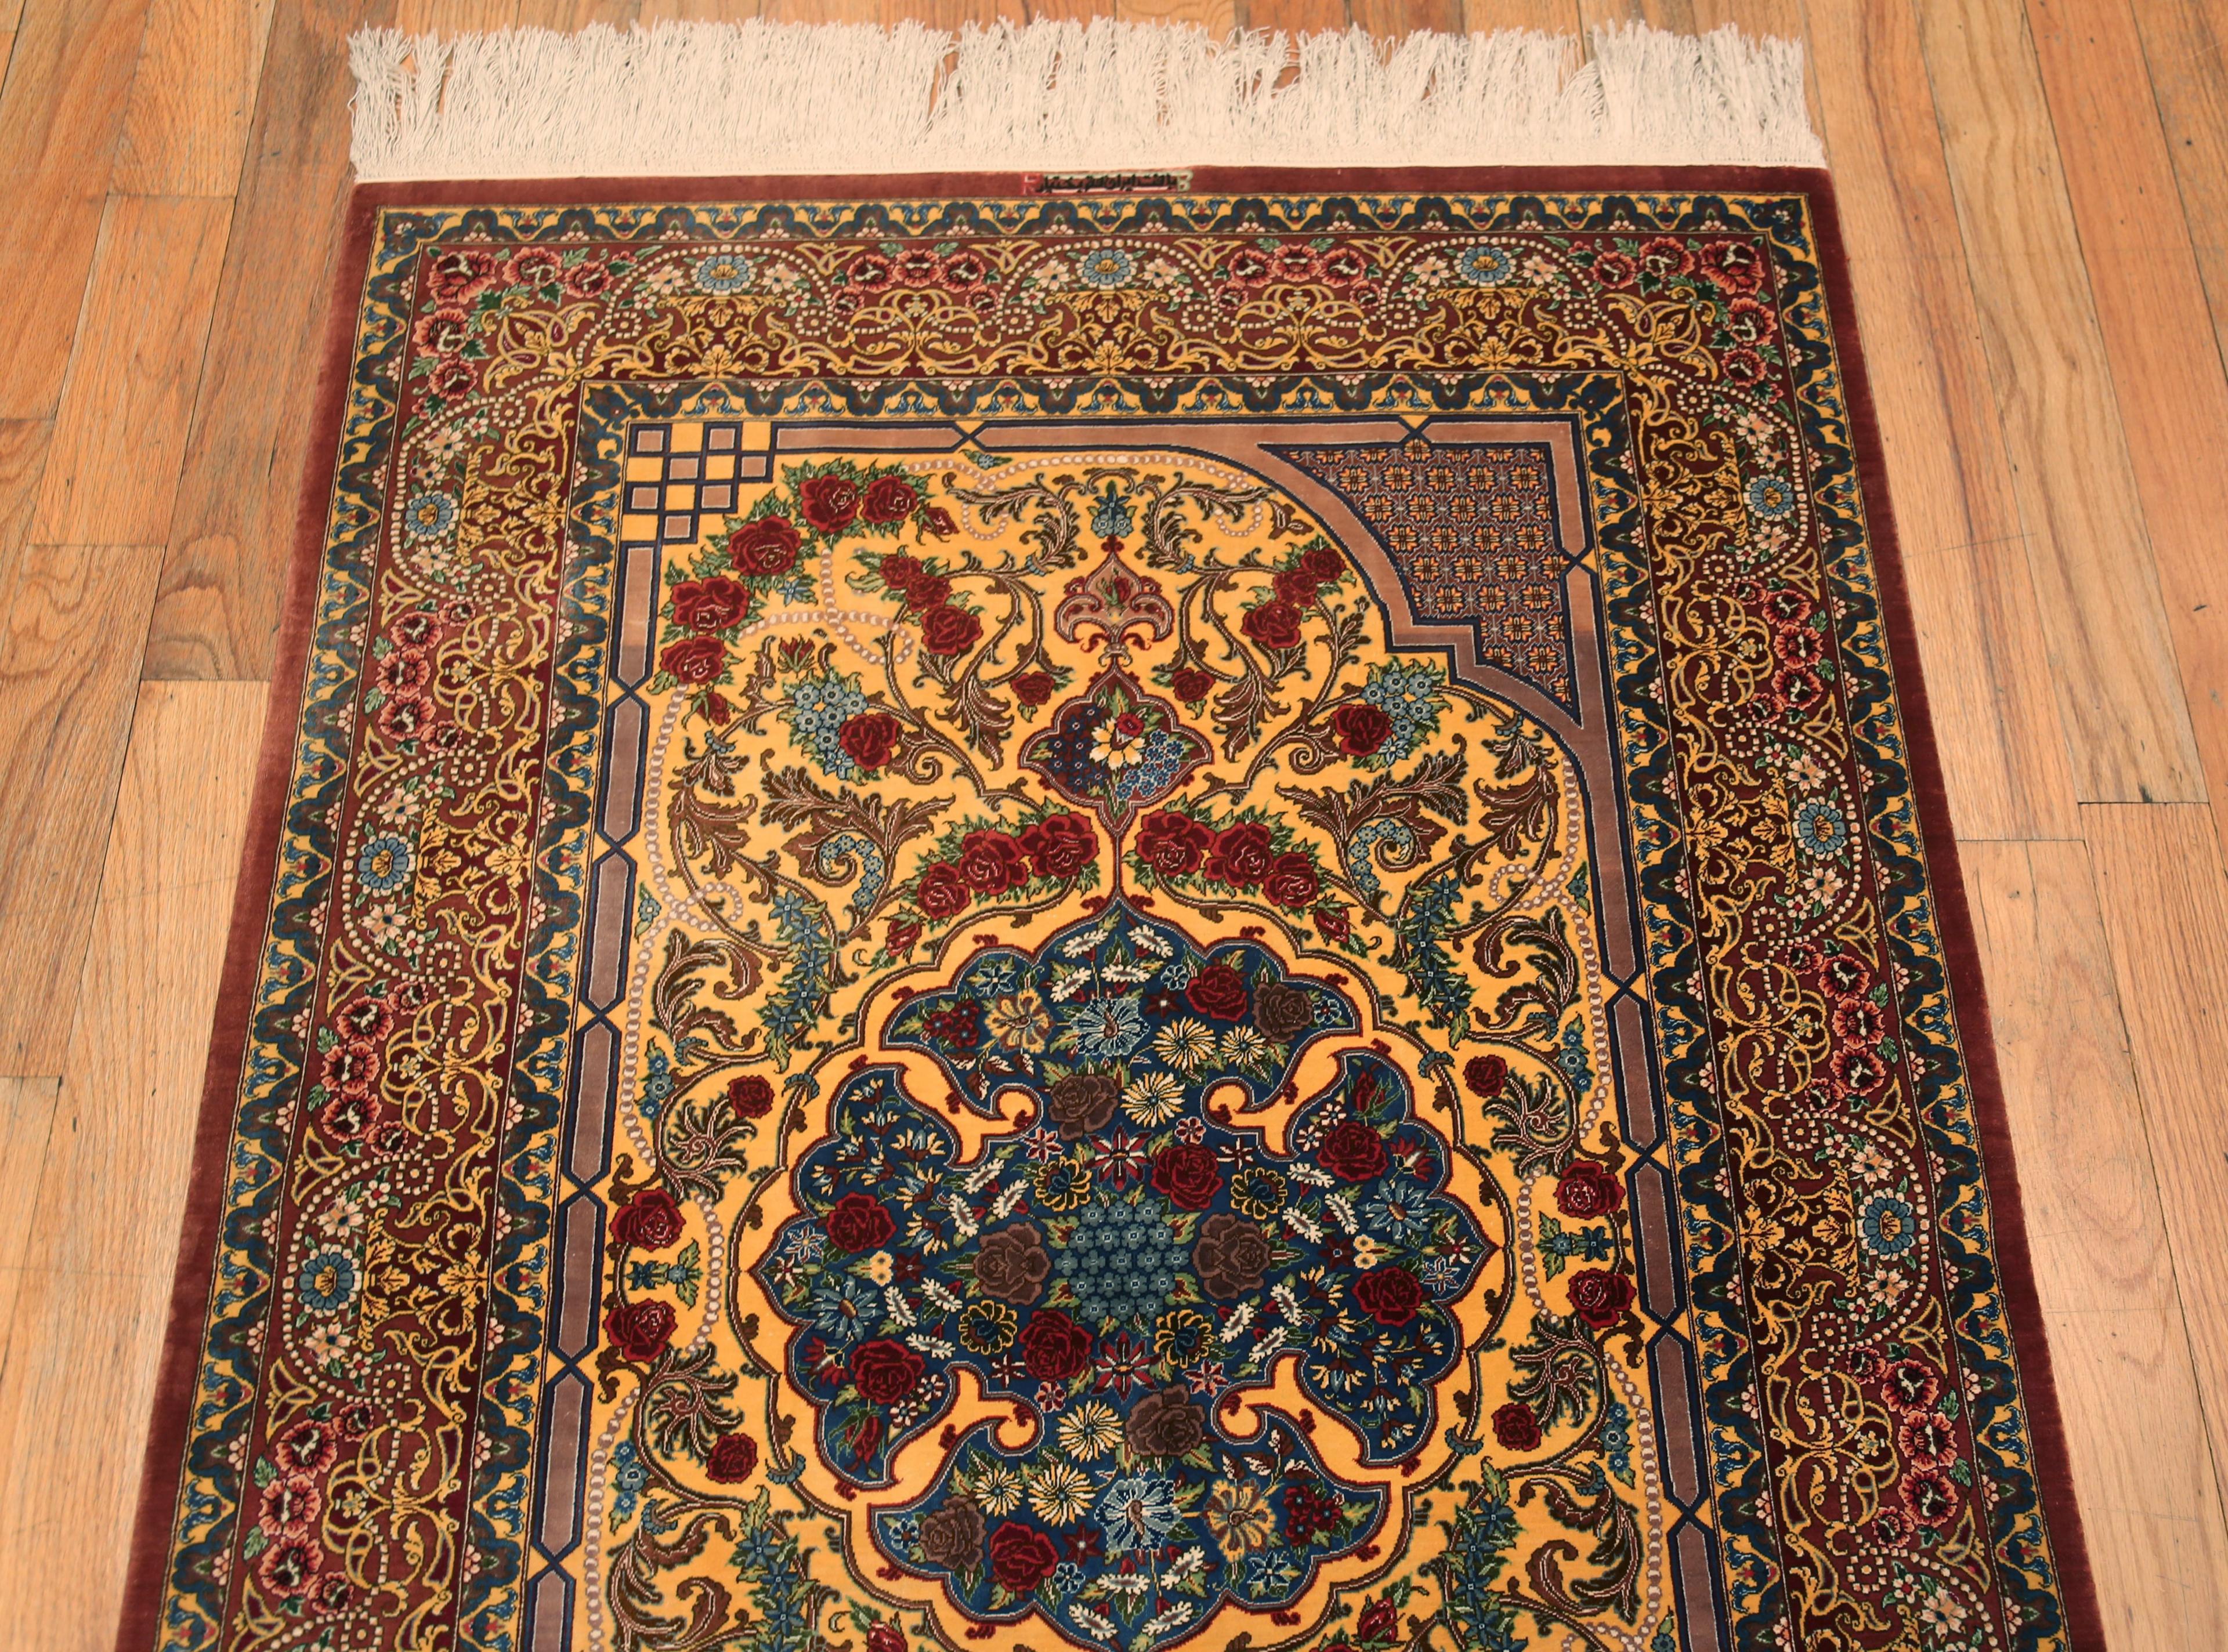 Fine Small Artistic Gold Color Luxurious Vintage Persian Silk Qum Rug 3'4